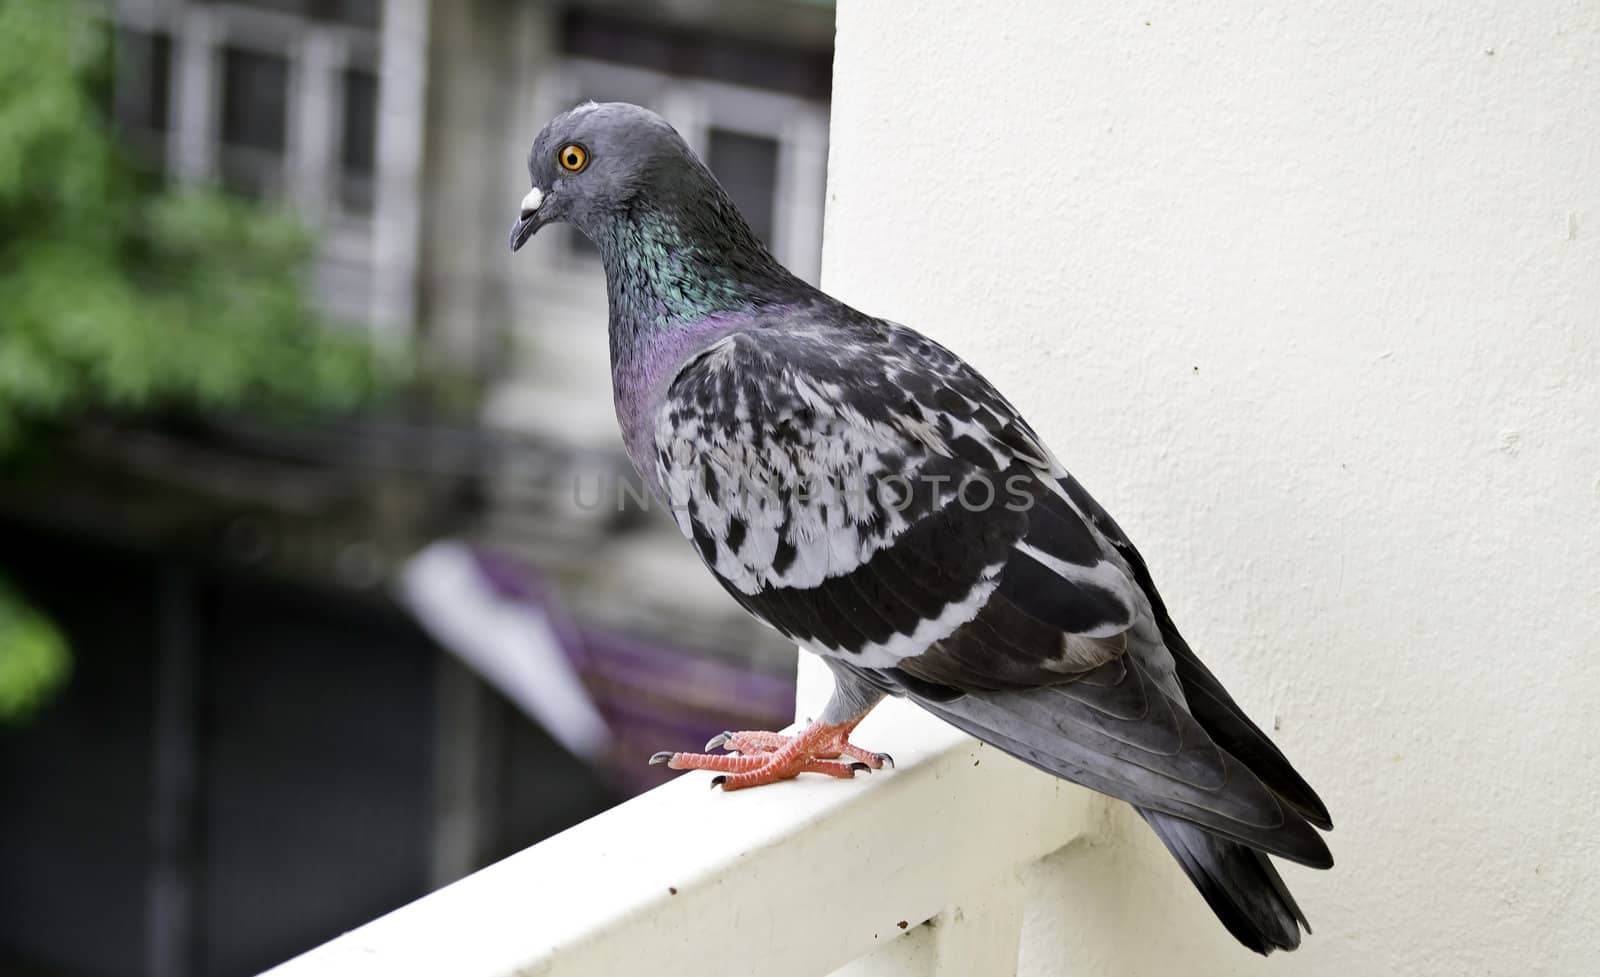 One grey pigeon standing on banister